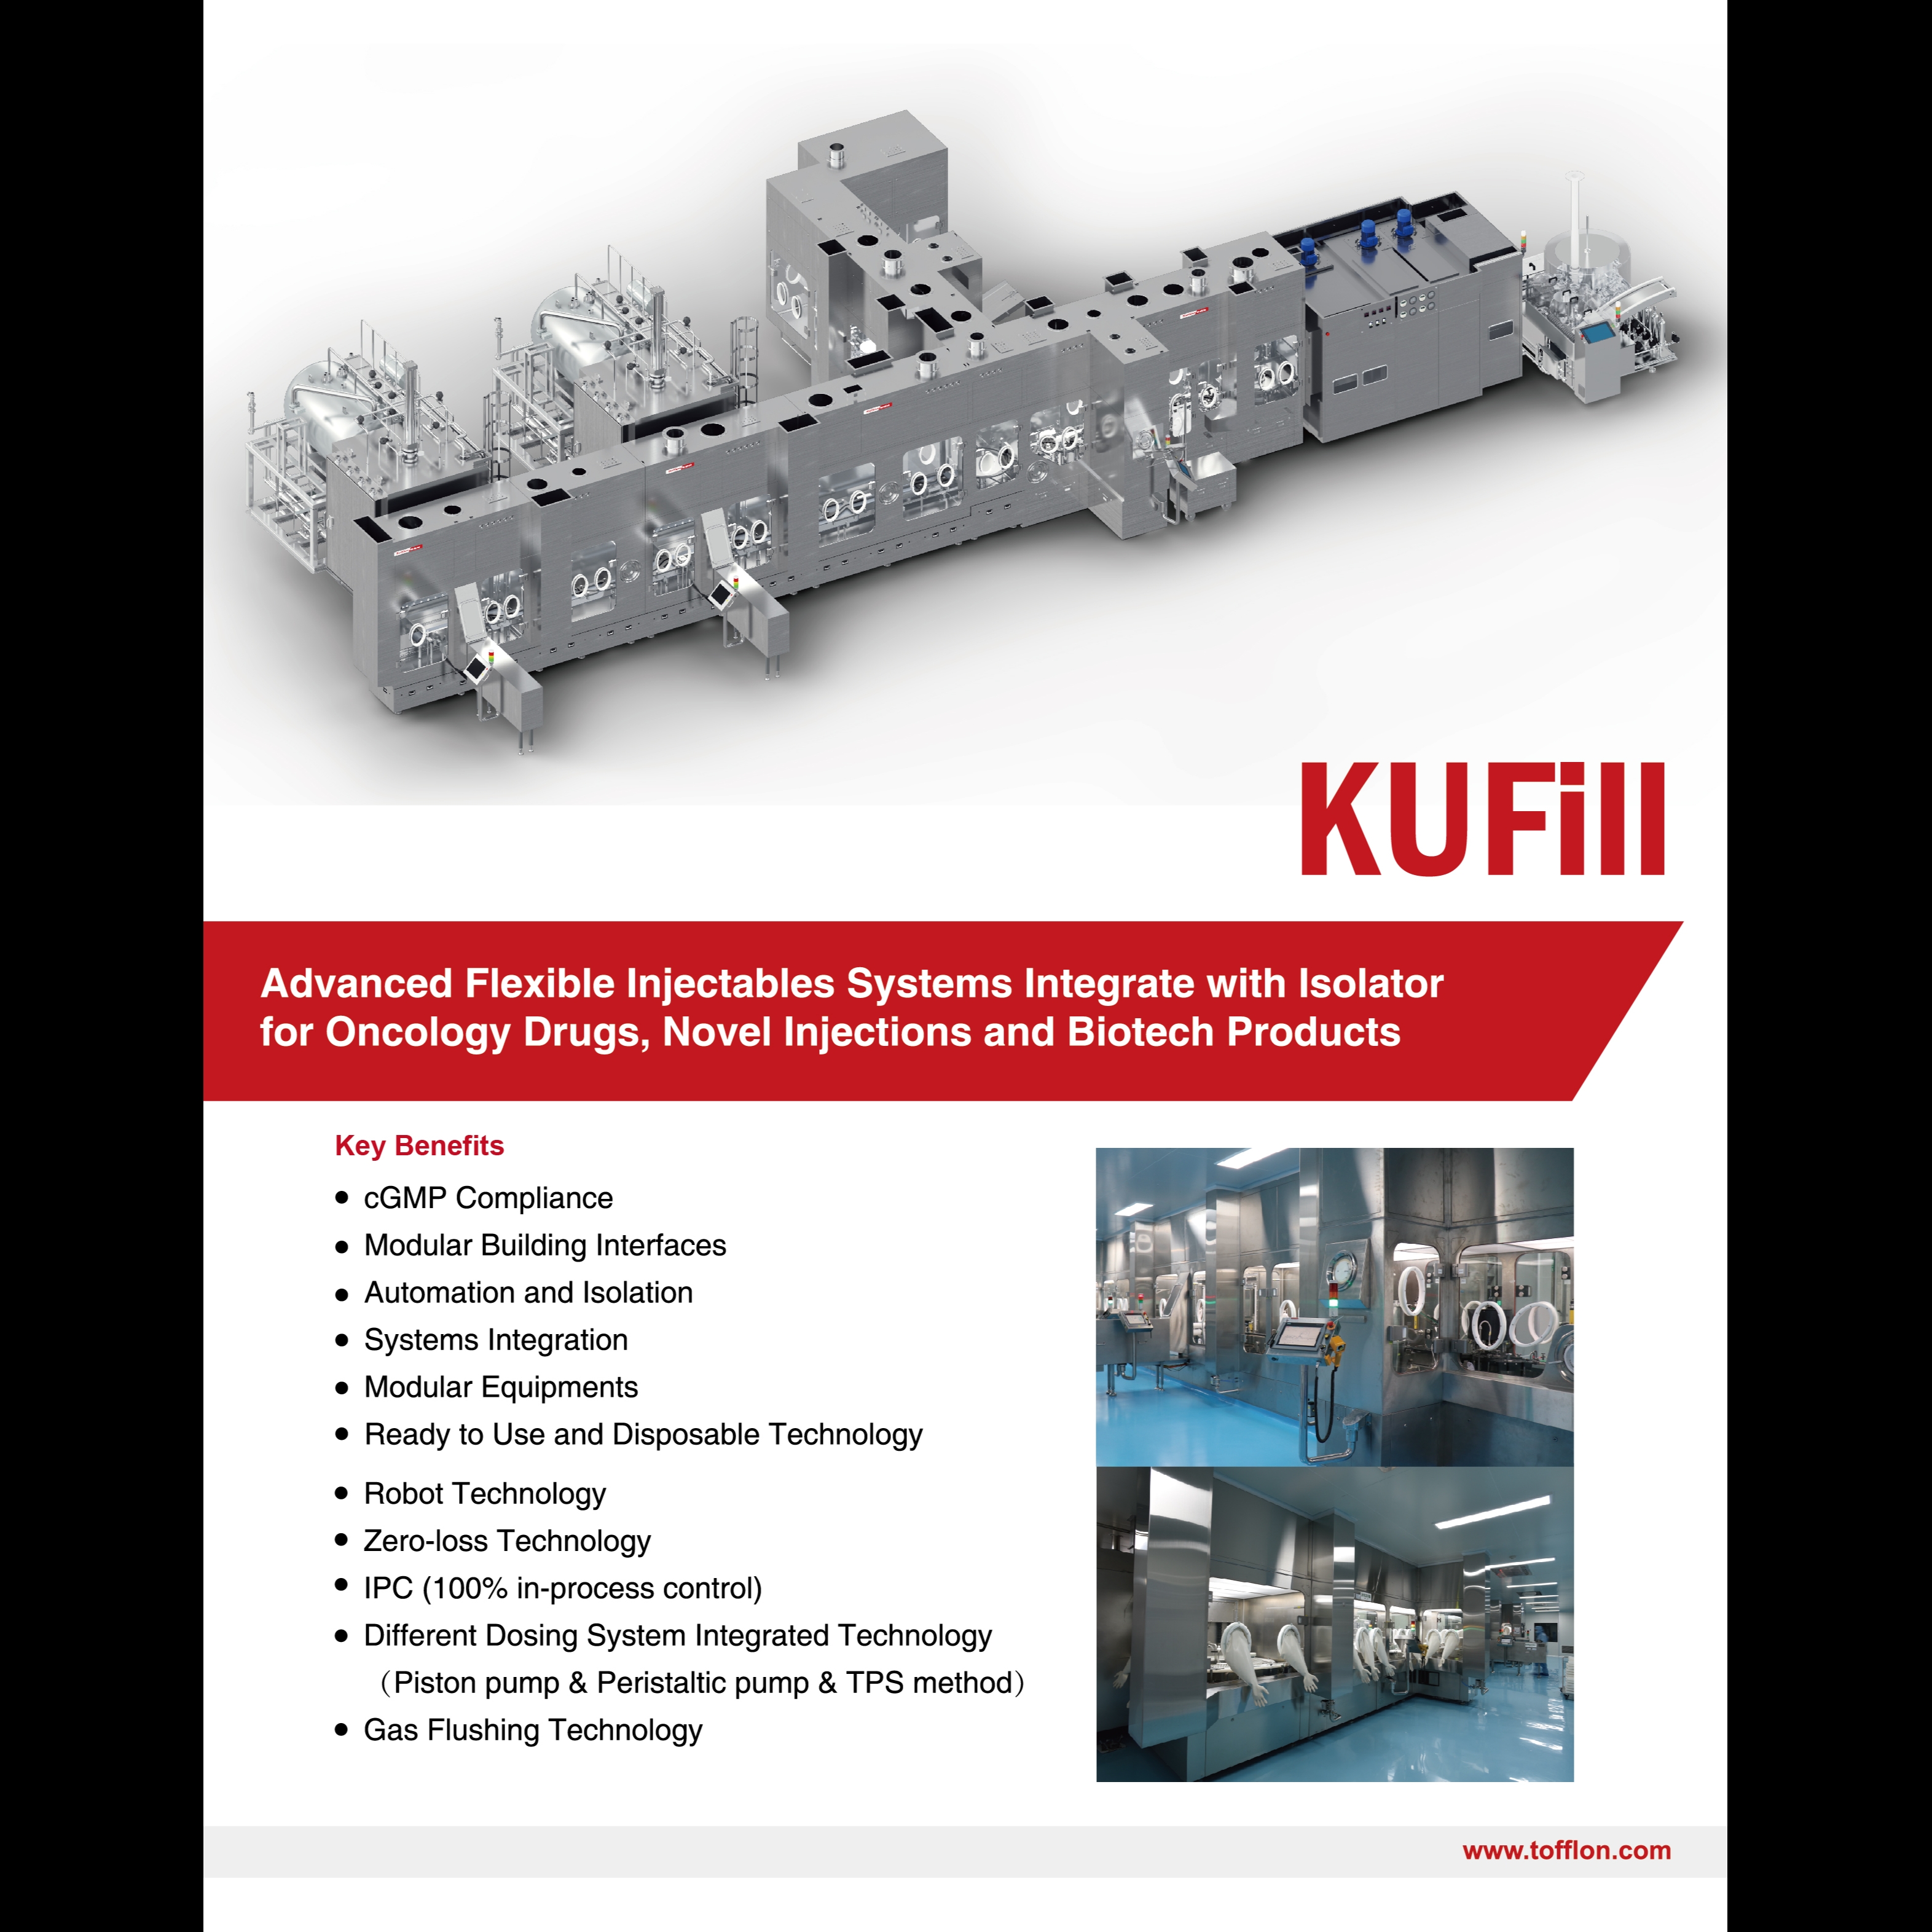 KUFill System